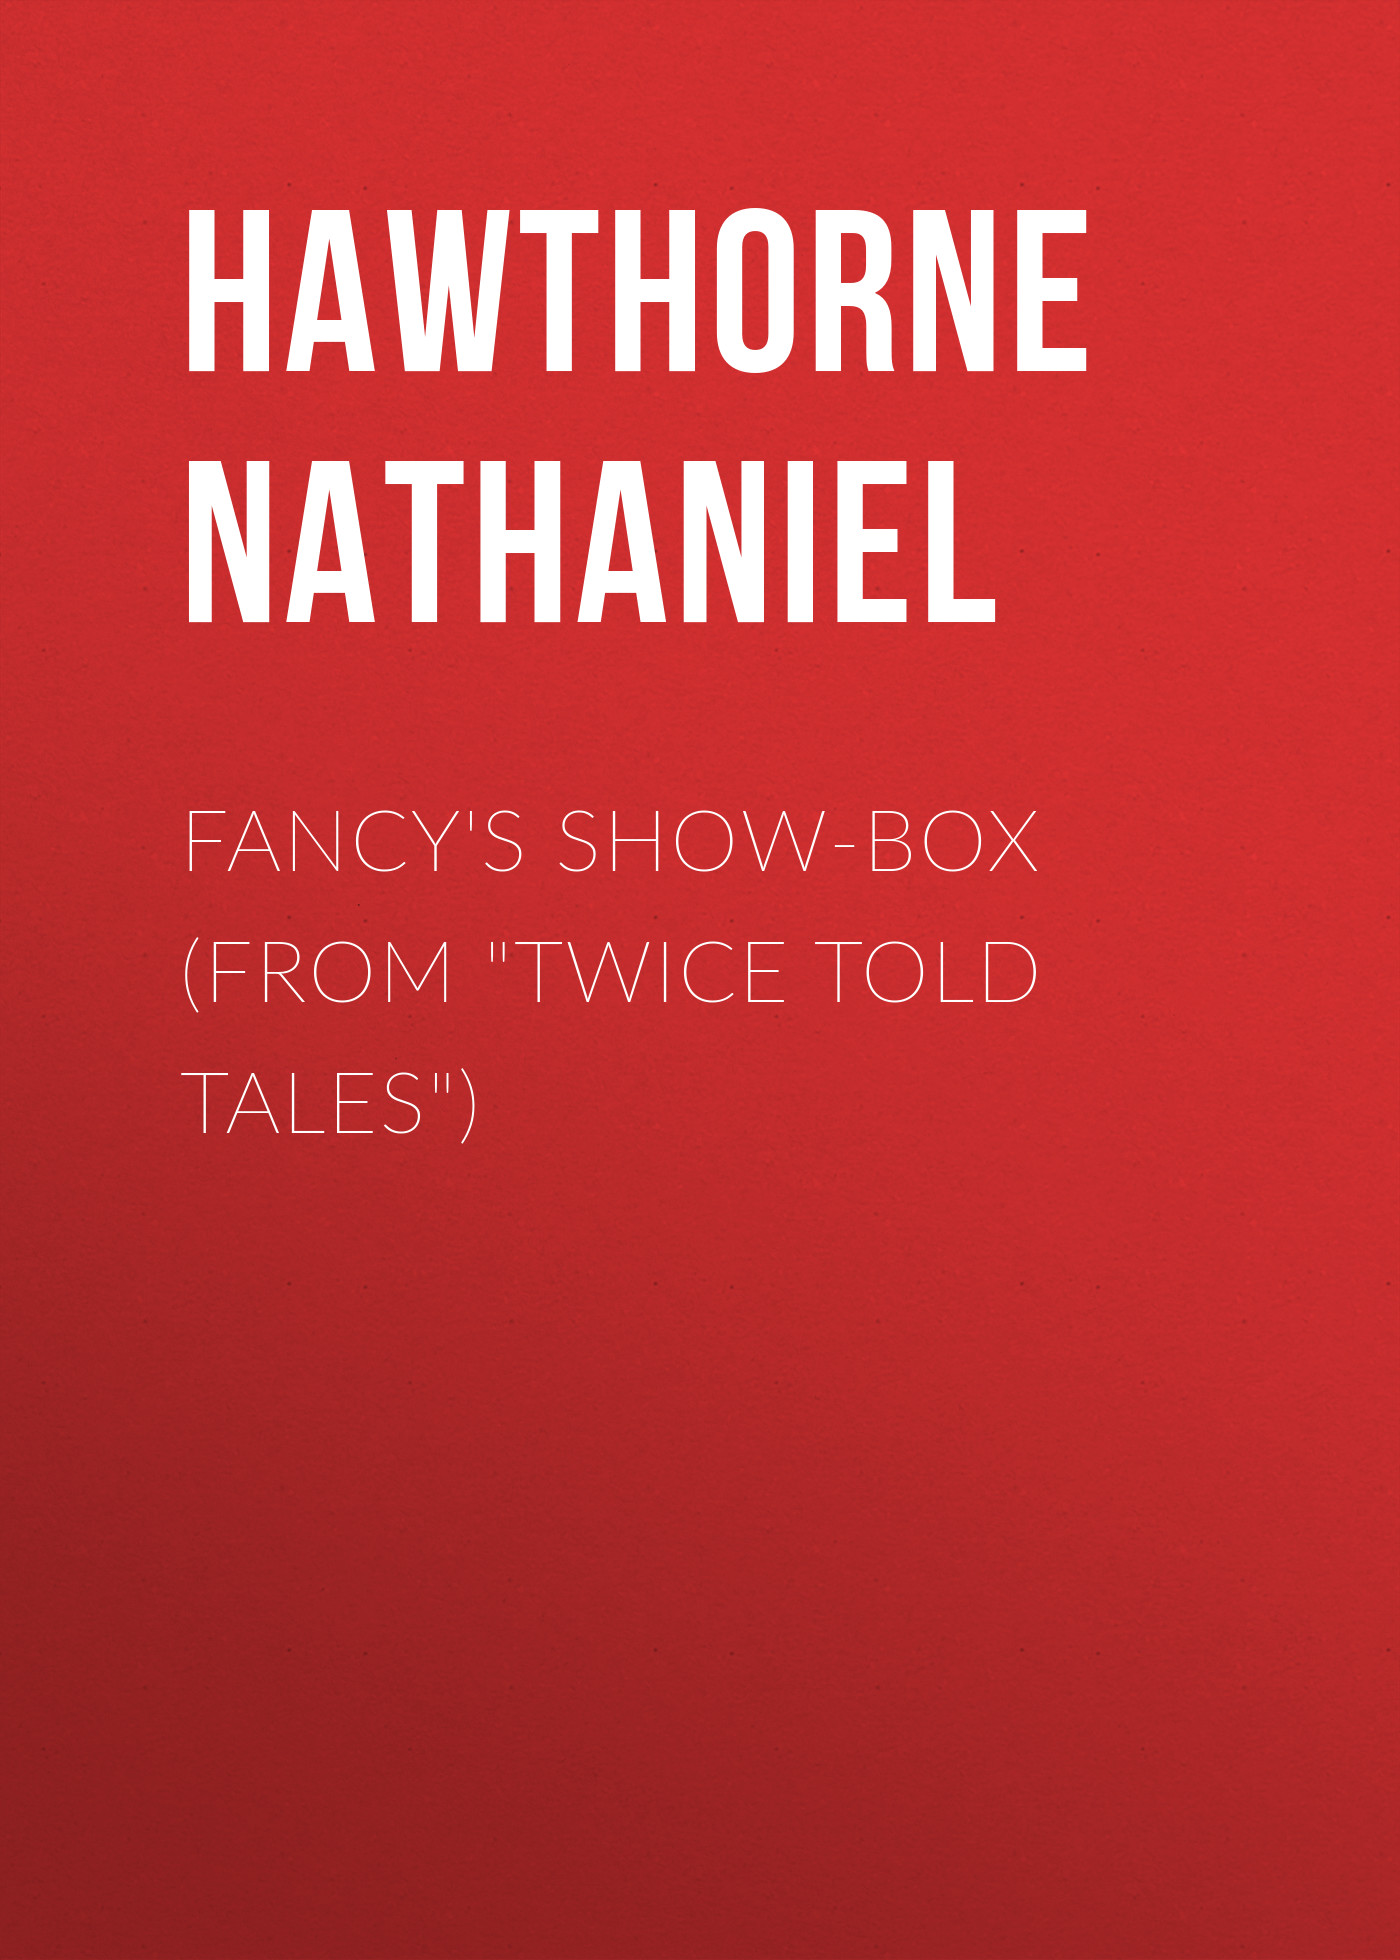 Fancy's Show-Box (From"Twice Told Tales")